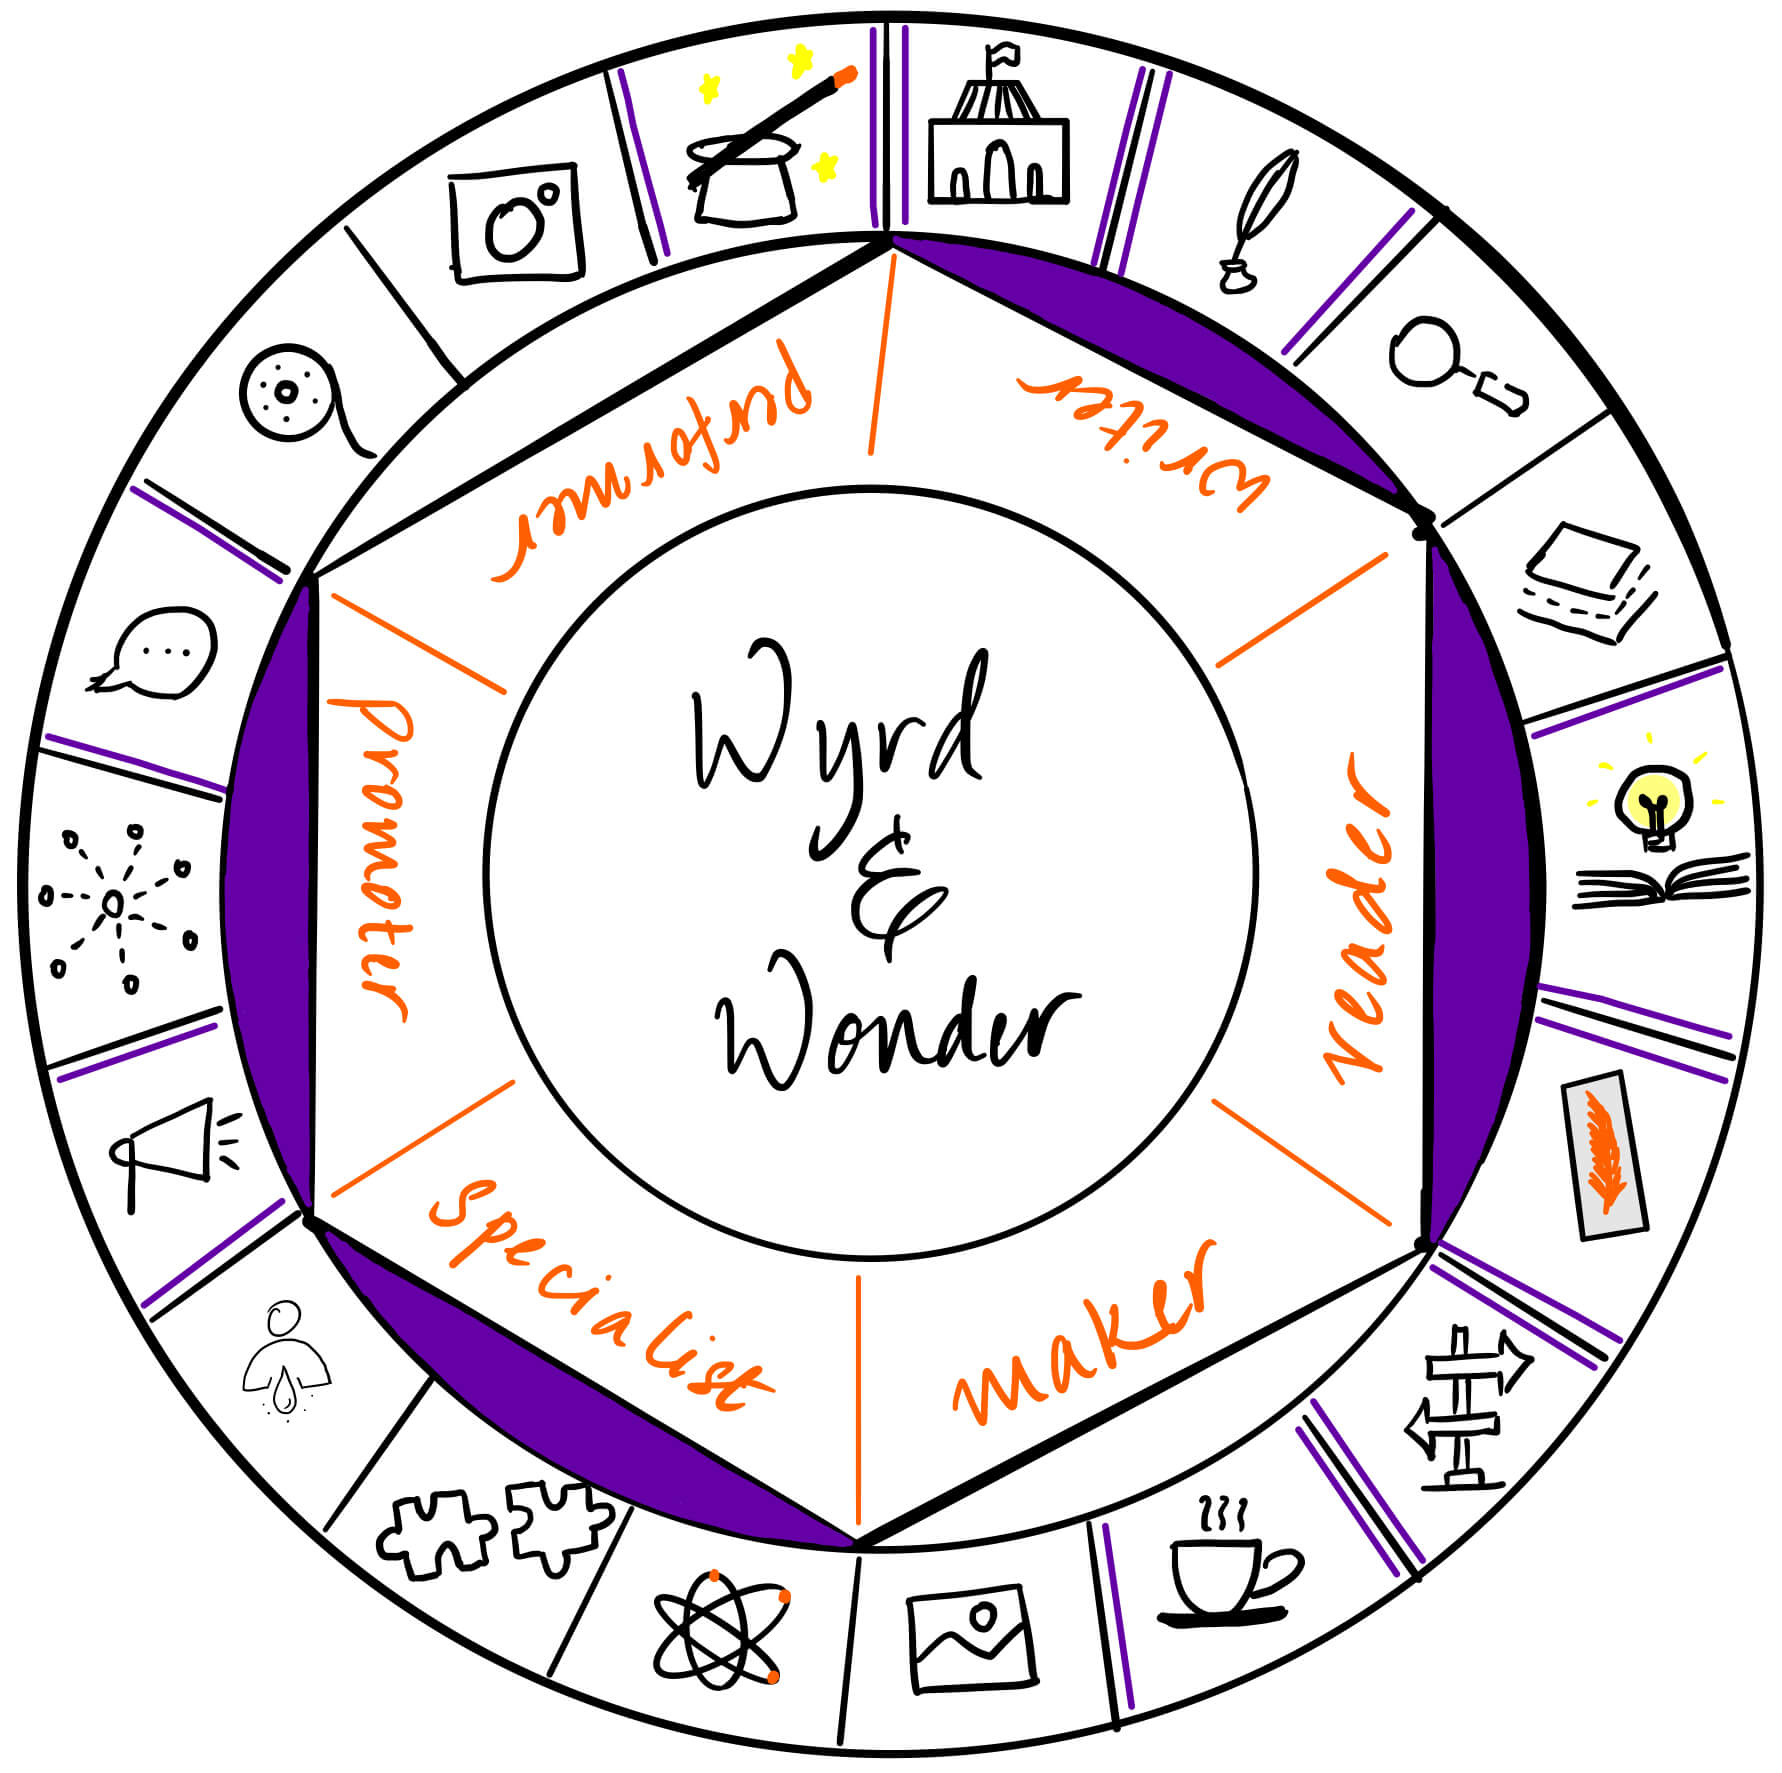 During Wyrd And Wonder, you can take on any role and celebrate fantasy. Imyril, Lisa and Jorie are readers, writers, specialists and promoters during the month of May.